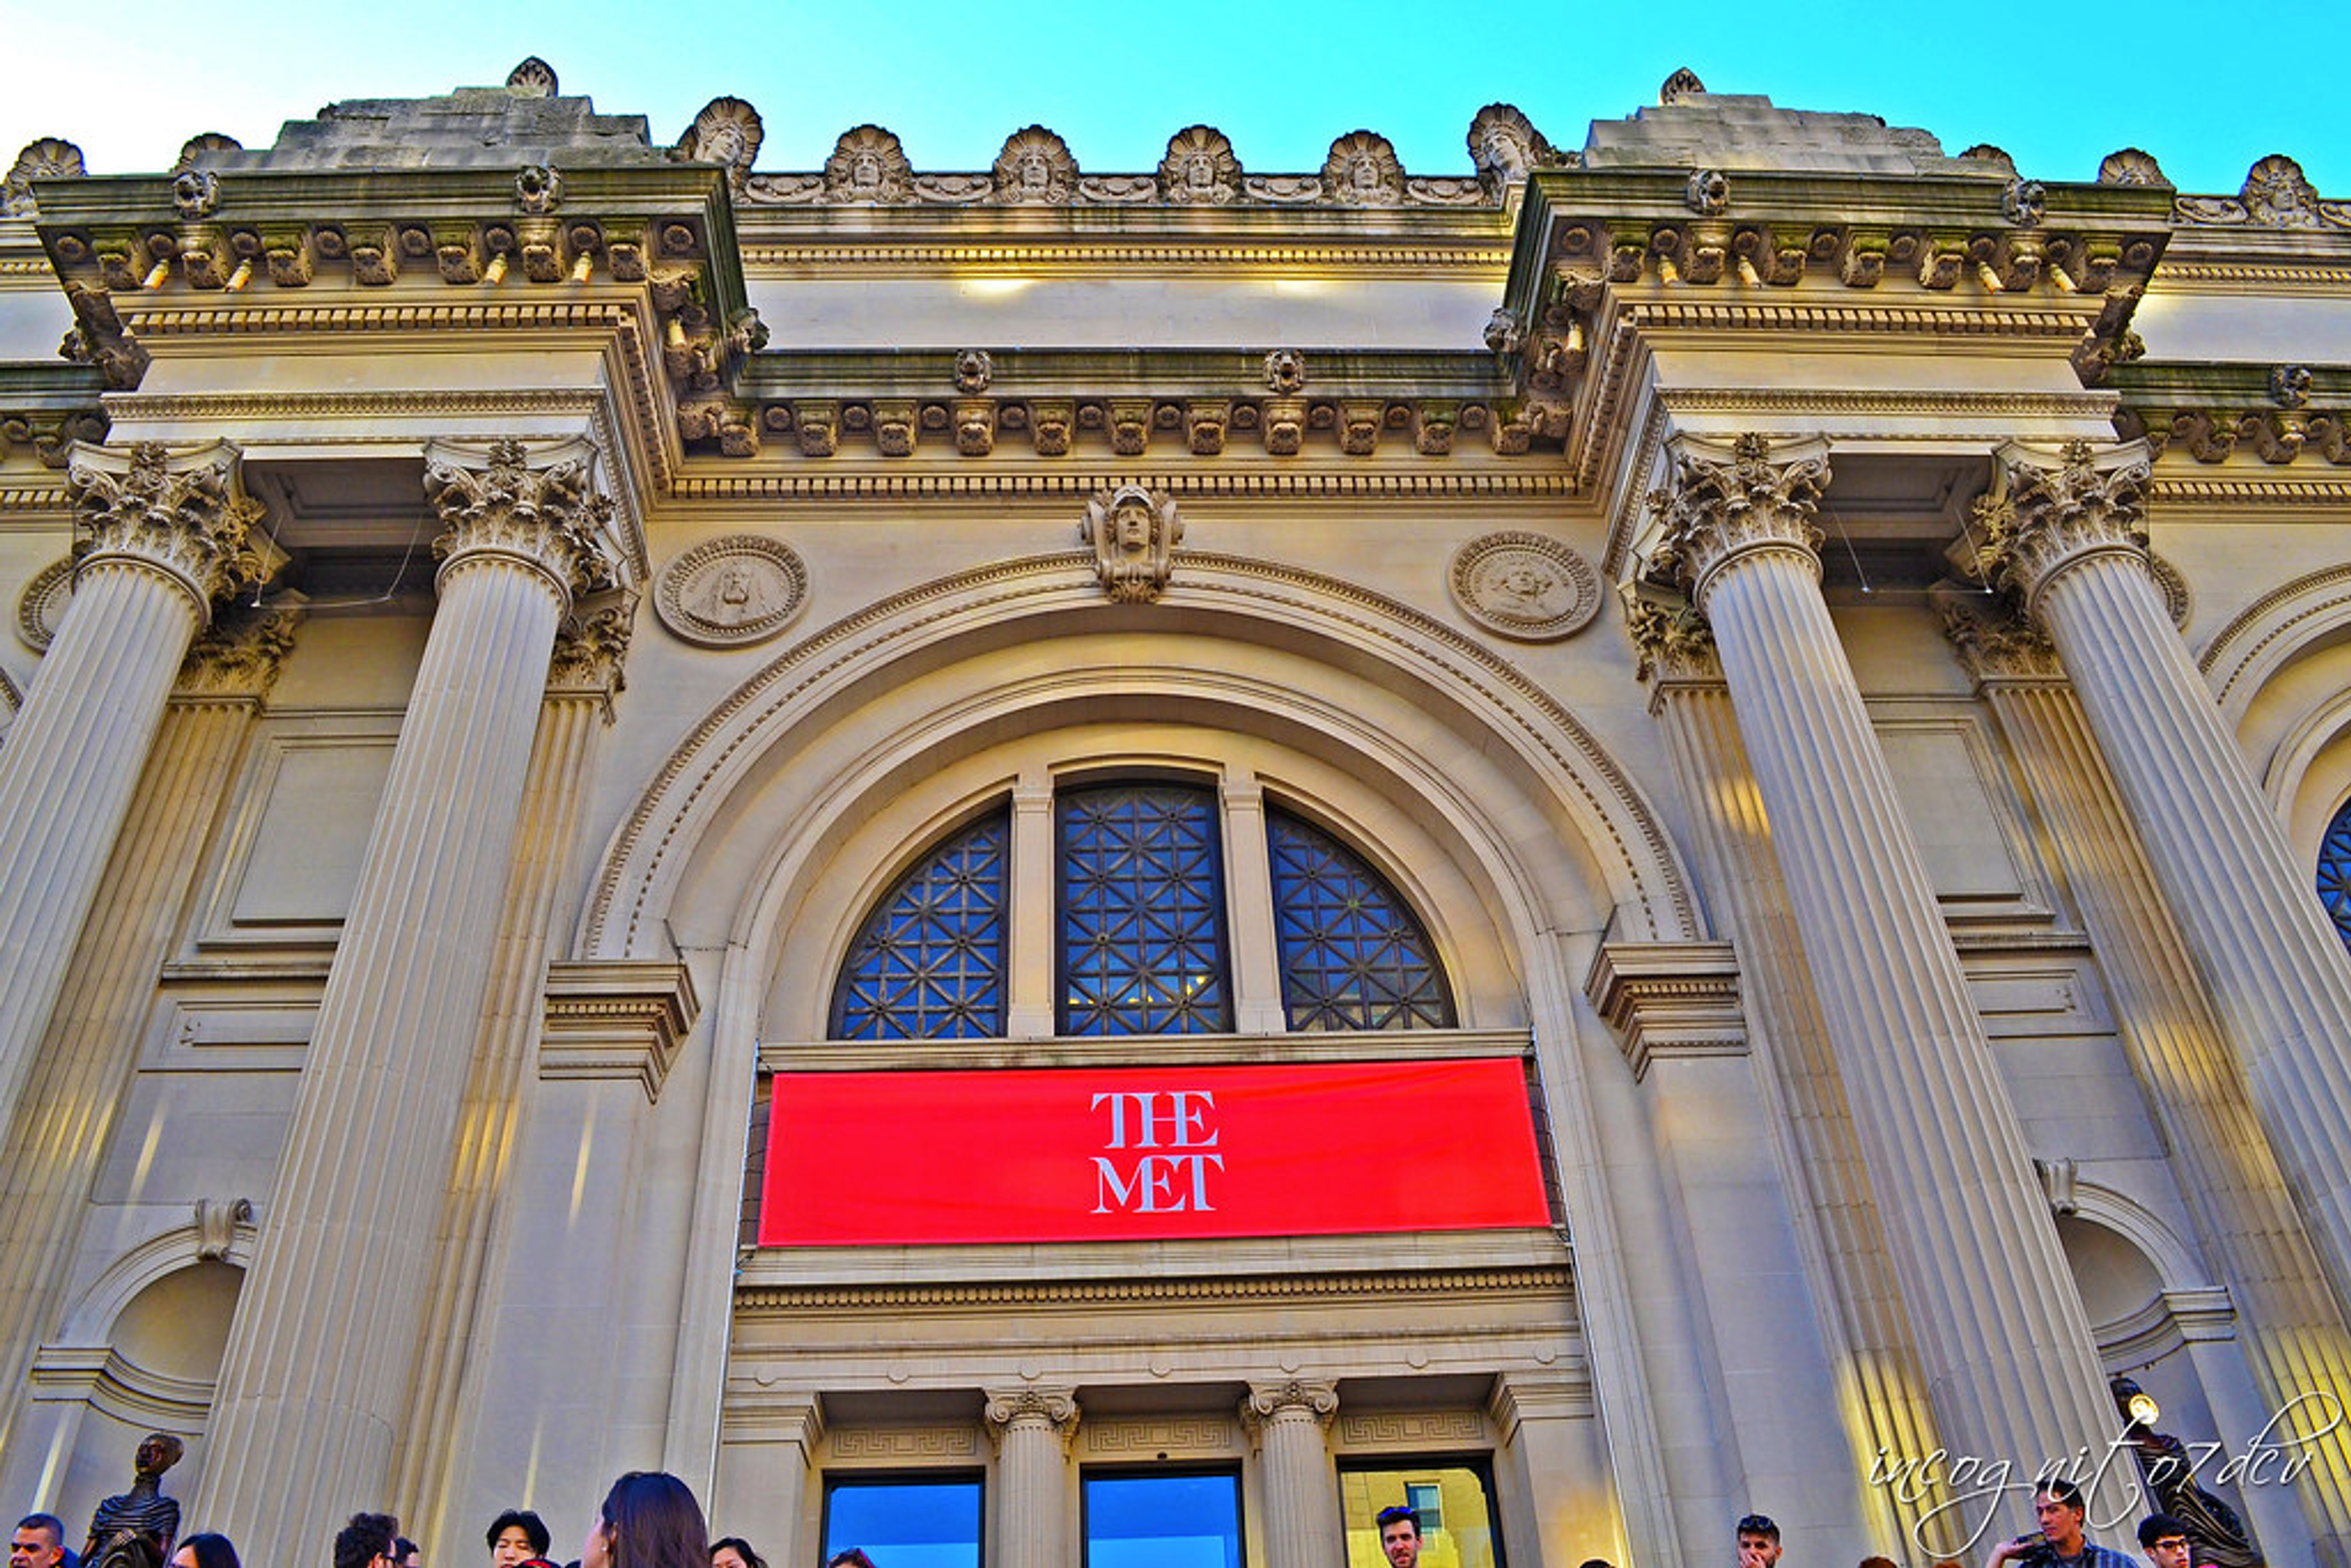 An image of the facade of the Metropolitan Museum of Art, adorned with a red banner with the museum's logo.